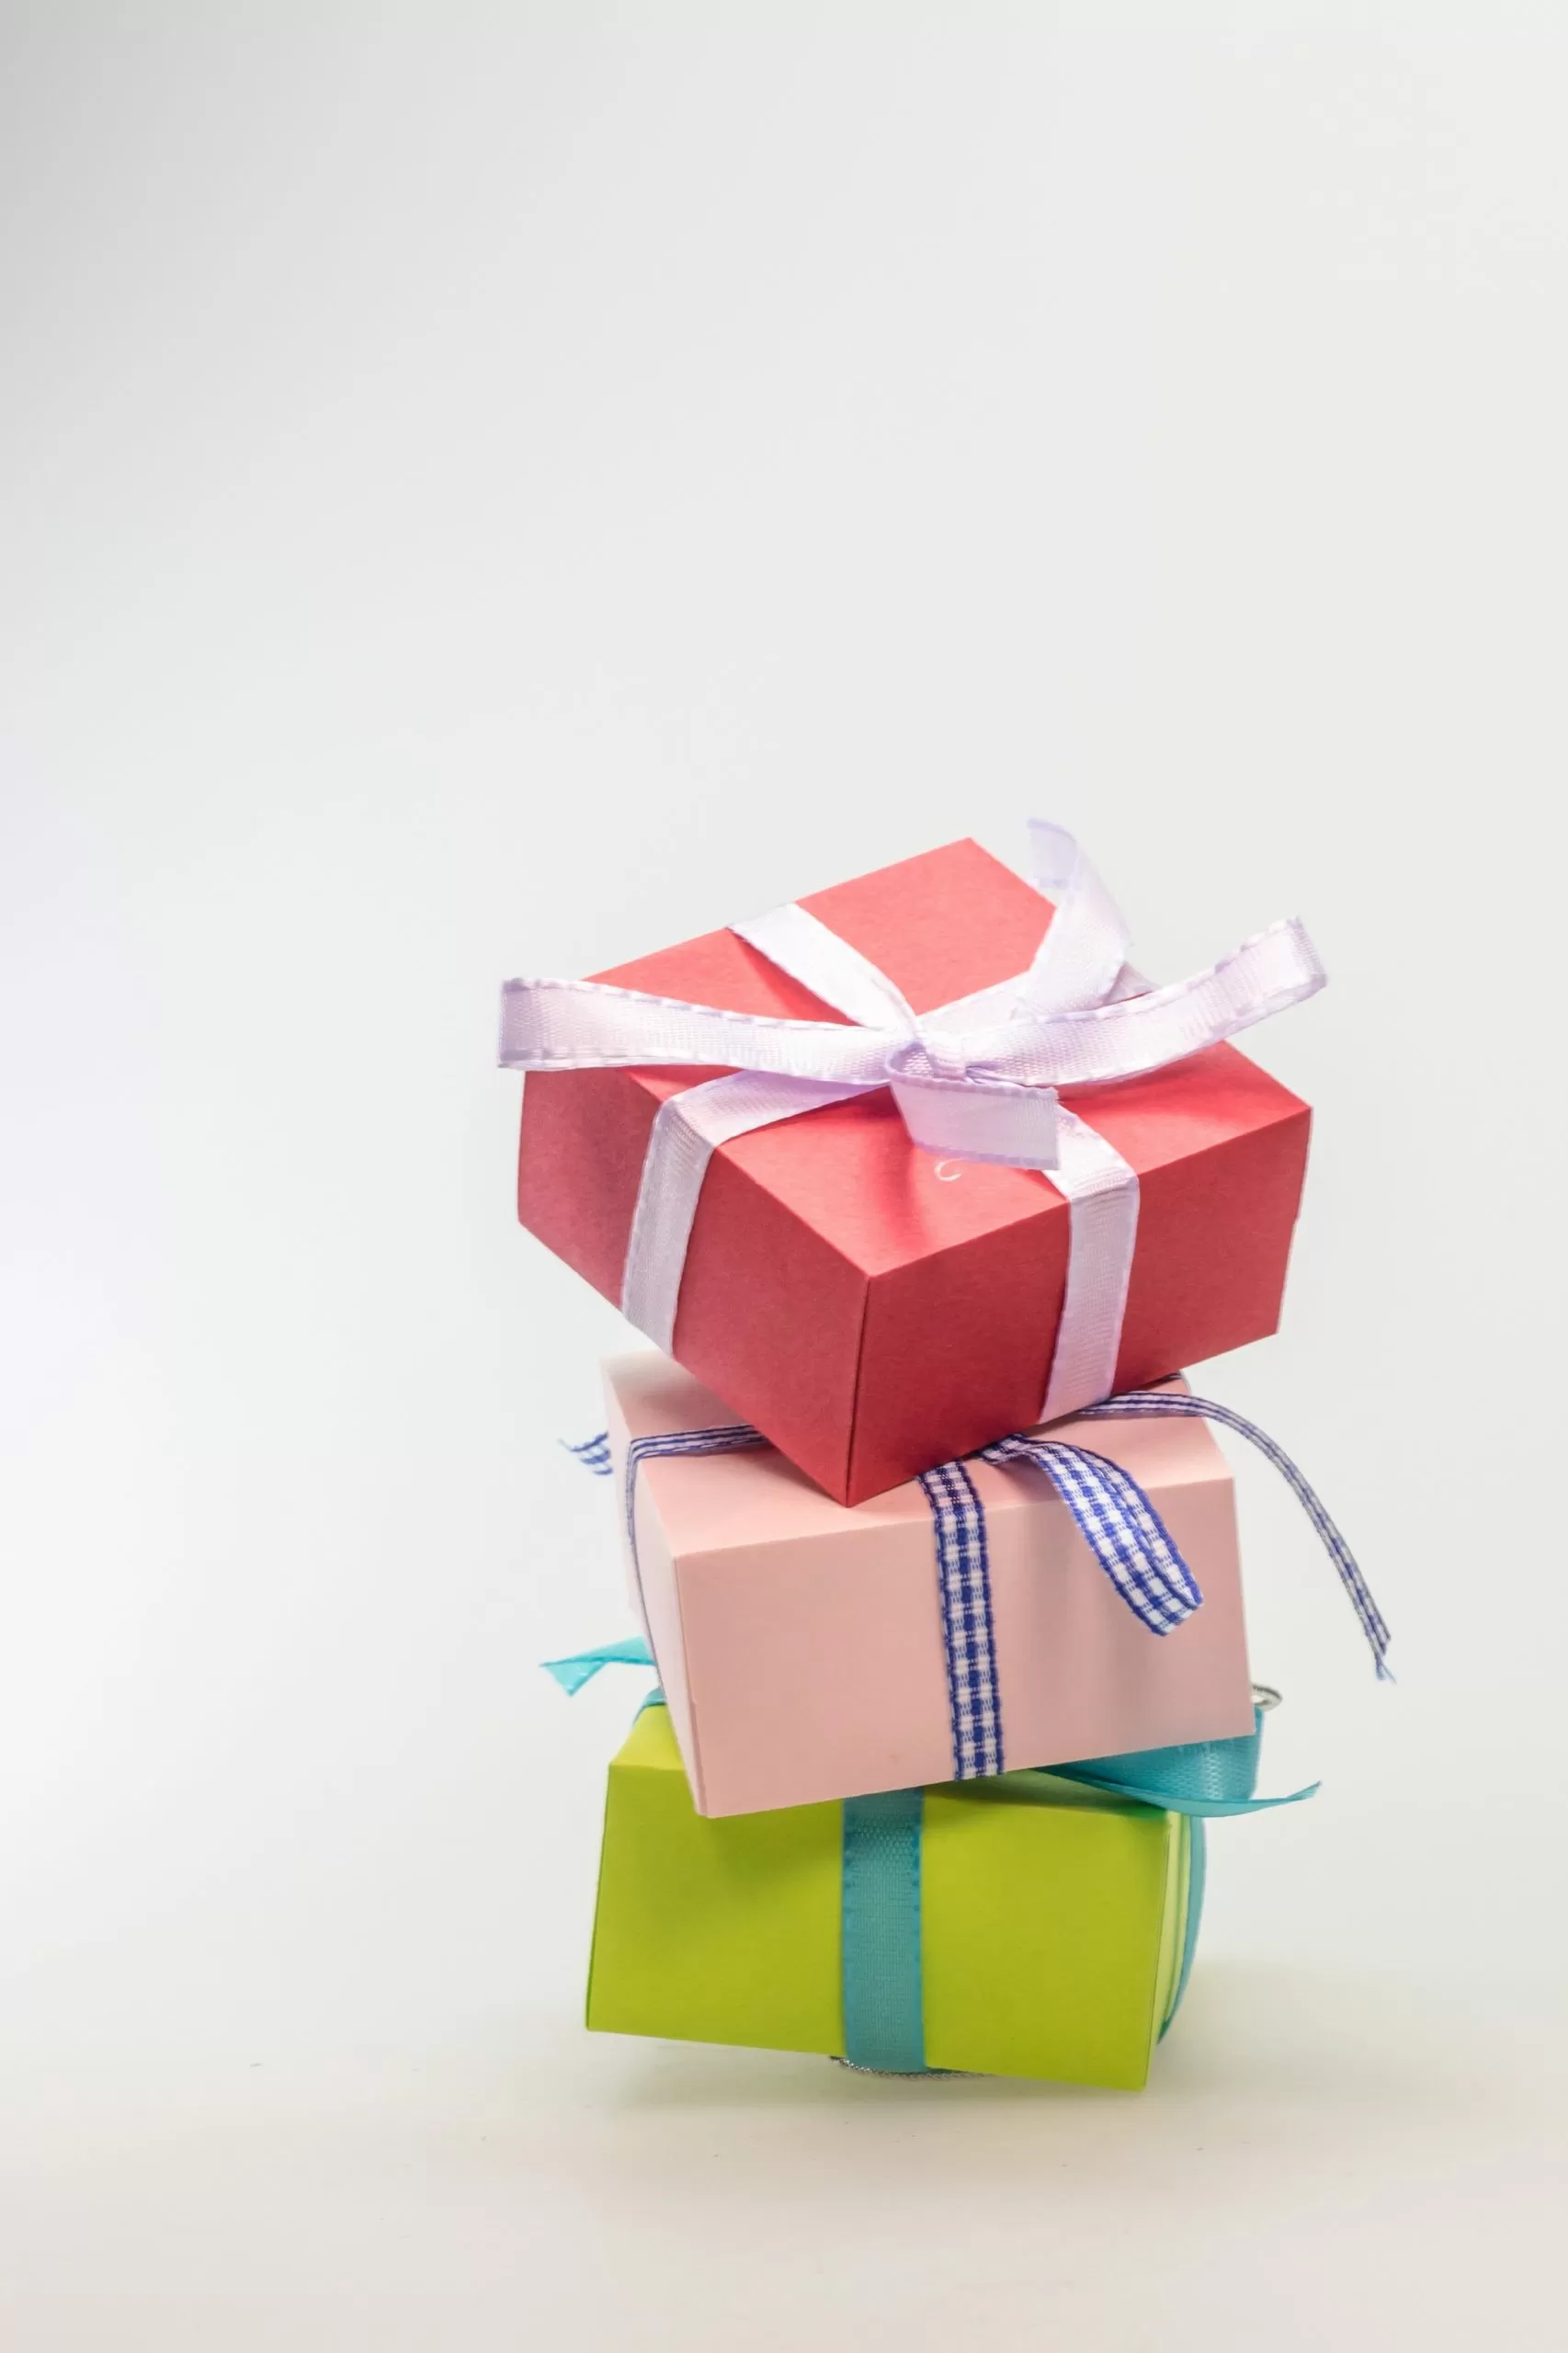 How and Why Prefer Gift Box Packaging?